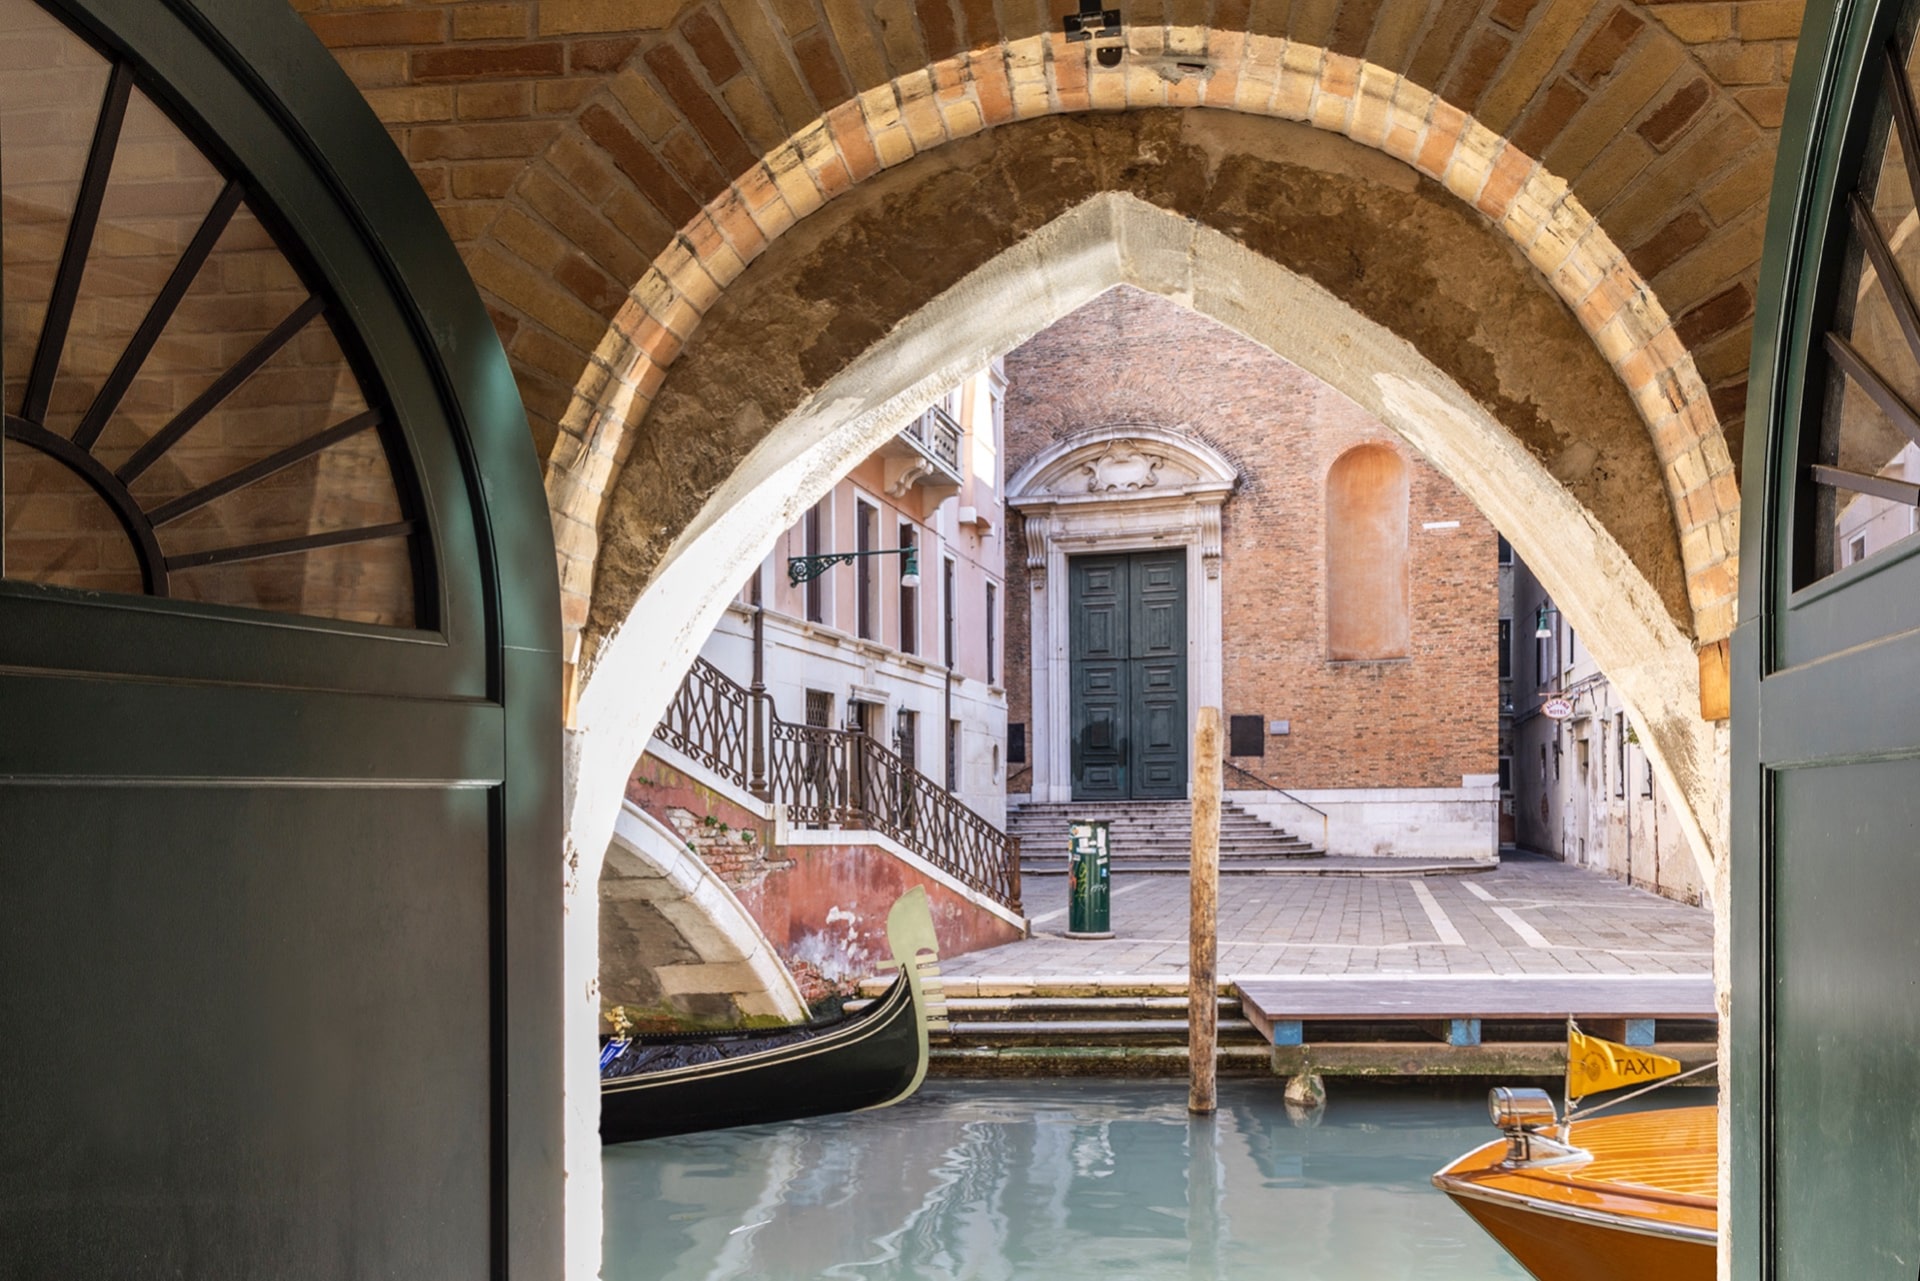 All the shades of Venice in the Rialto Luxury Apartments designed by THDP